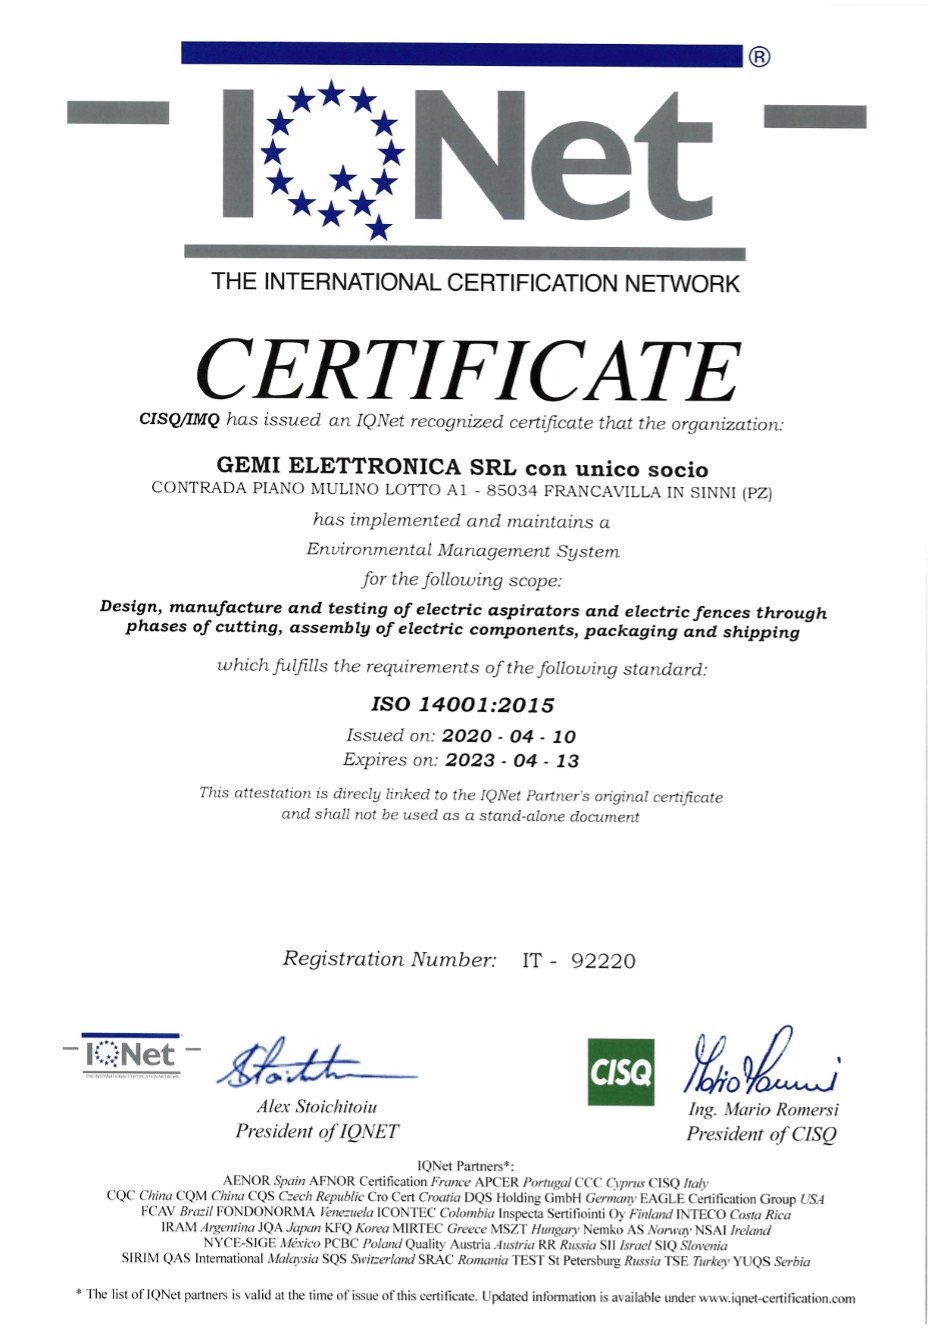 IQNET Certification by Gemi Elettronica